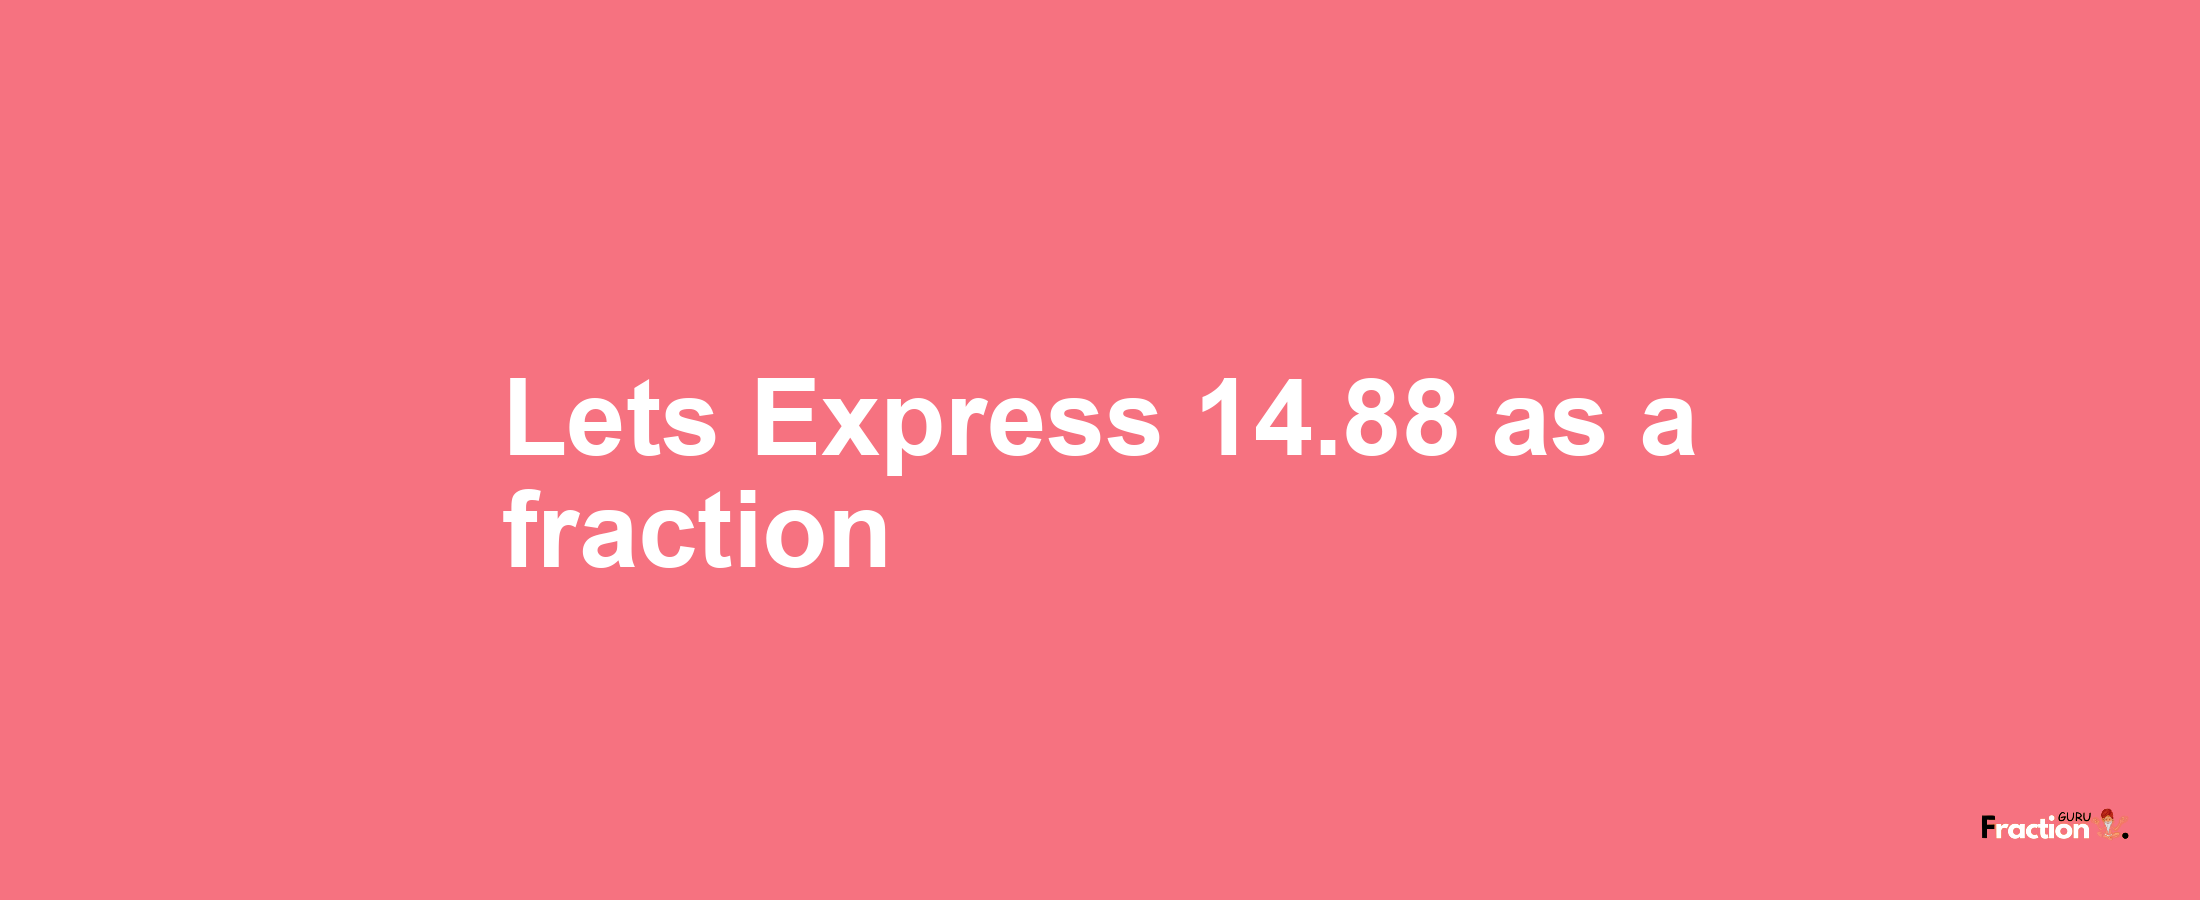 Lets Express 14.88 as afraction